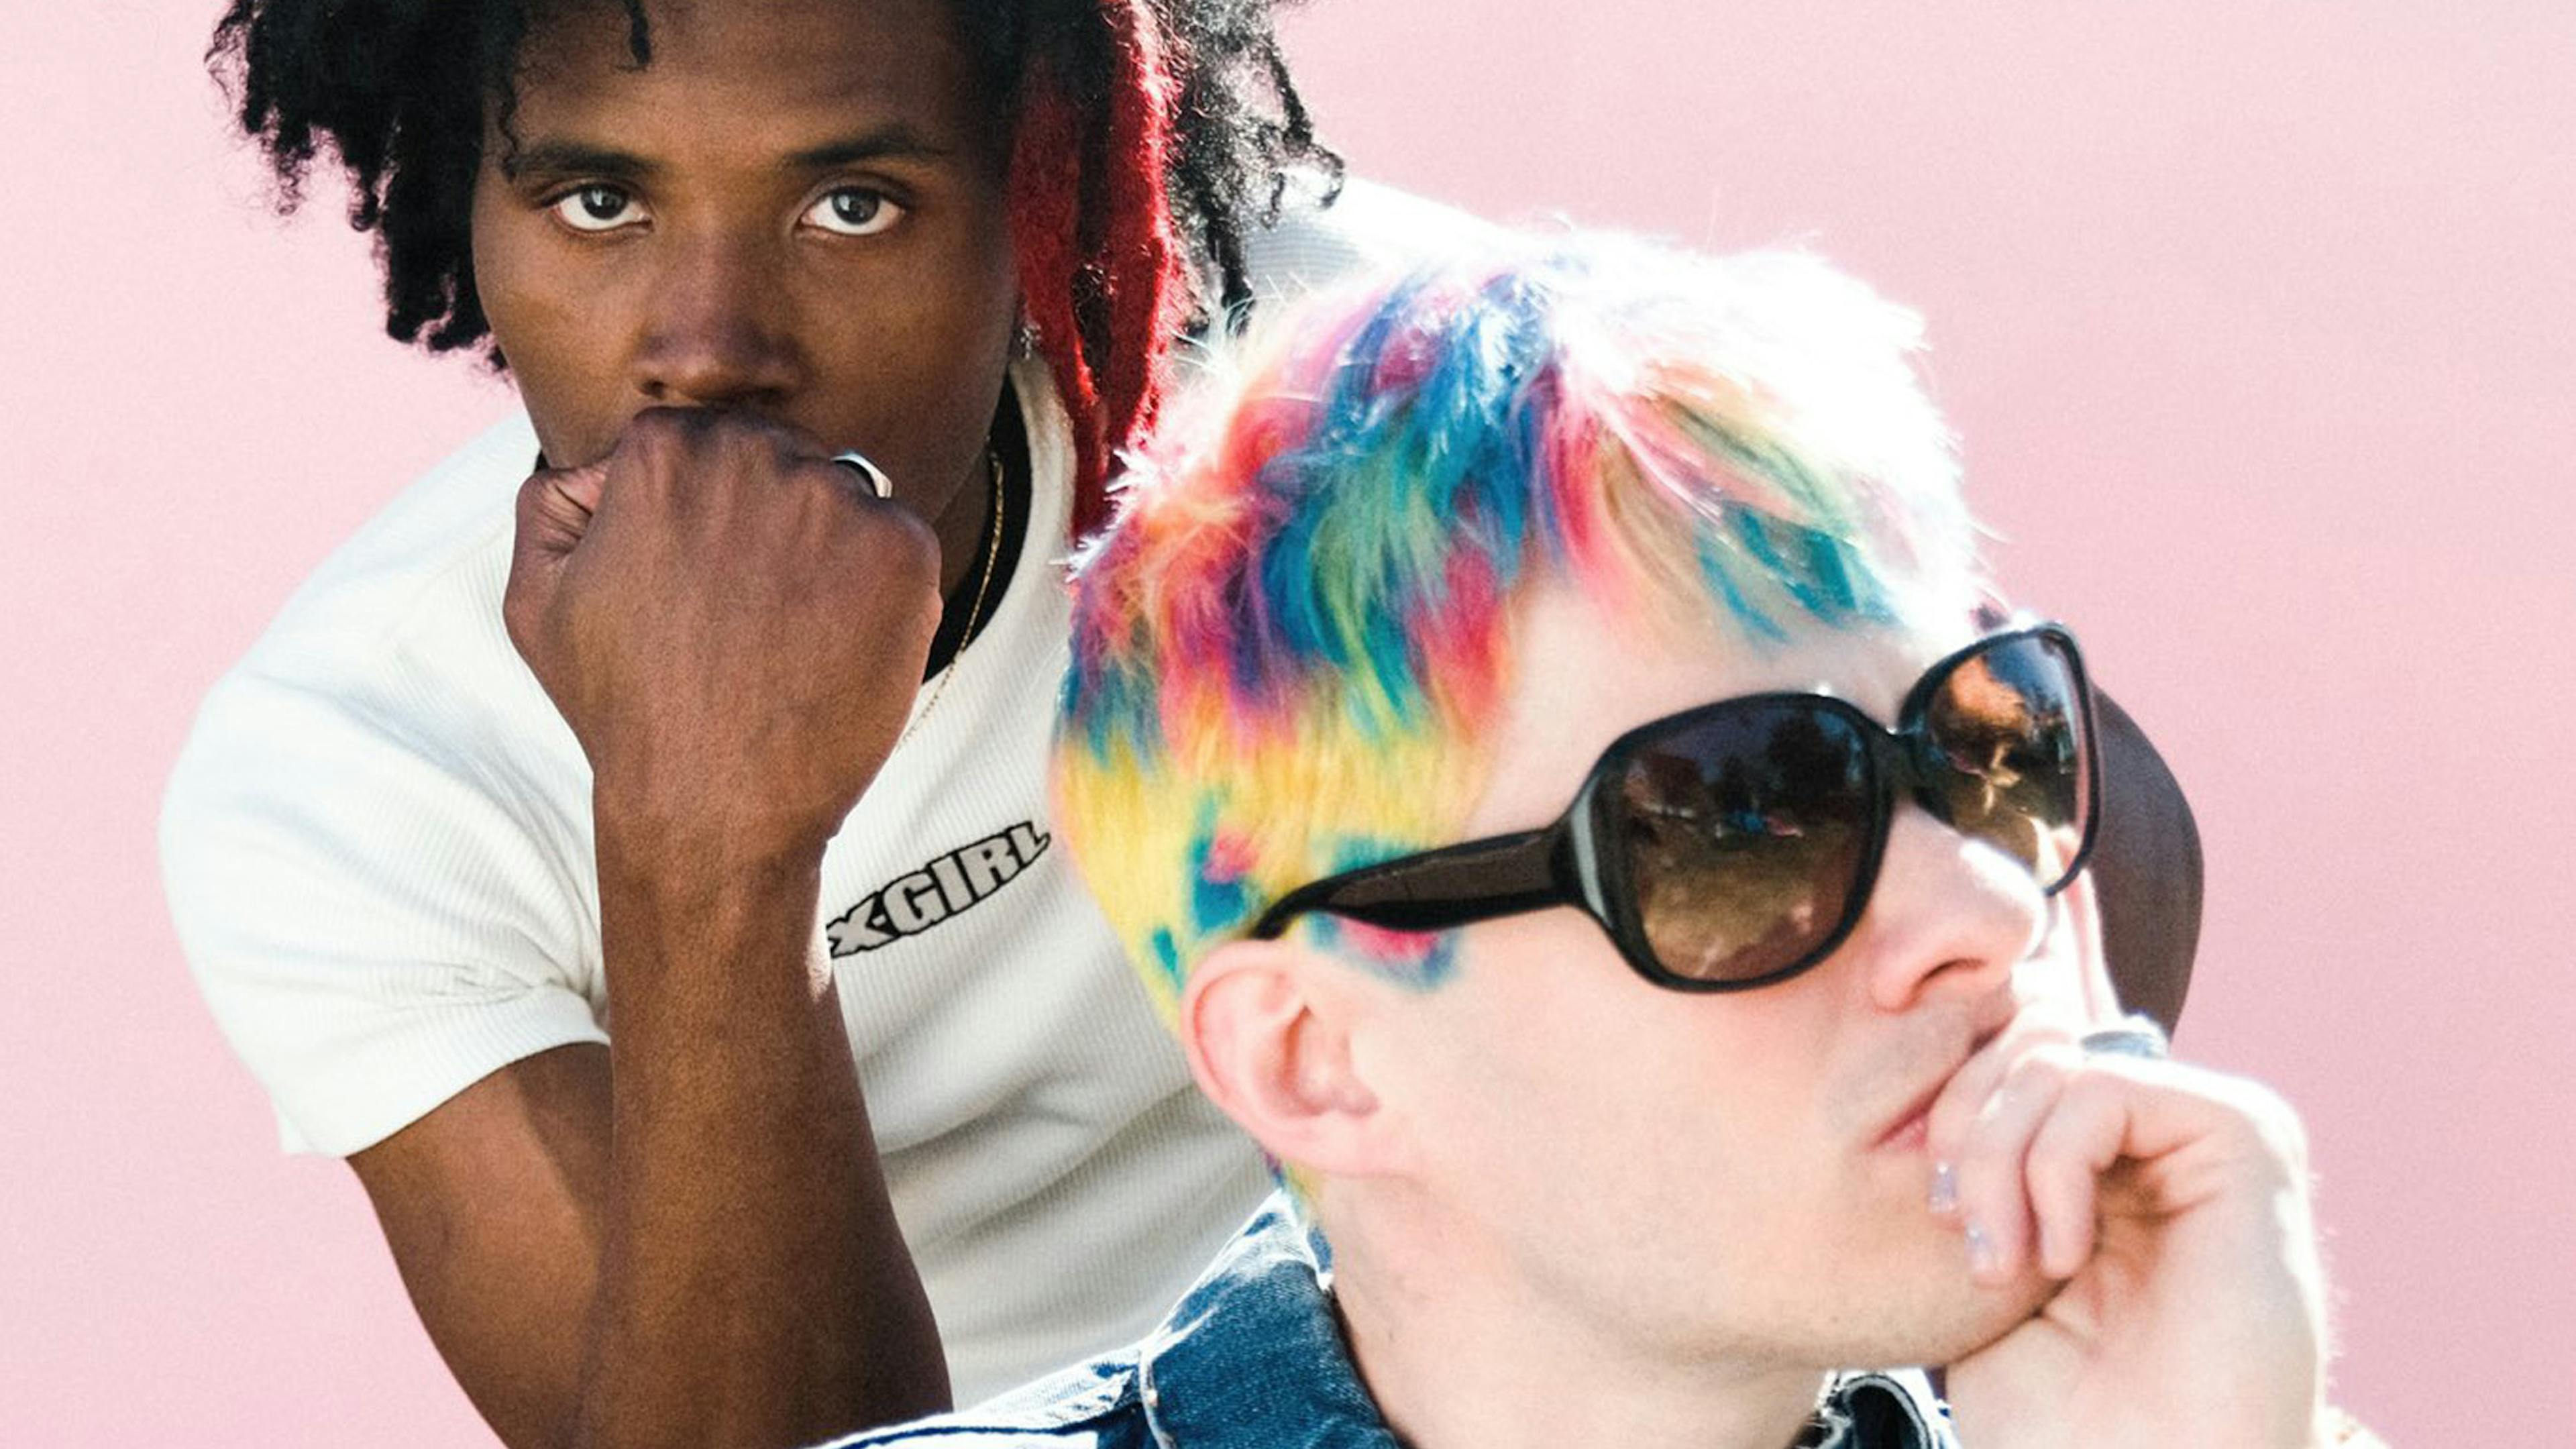 De'Wayne and Awsten Knight are releasing a new single on Thursday